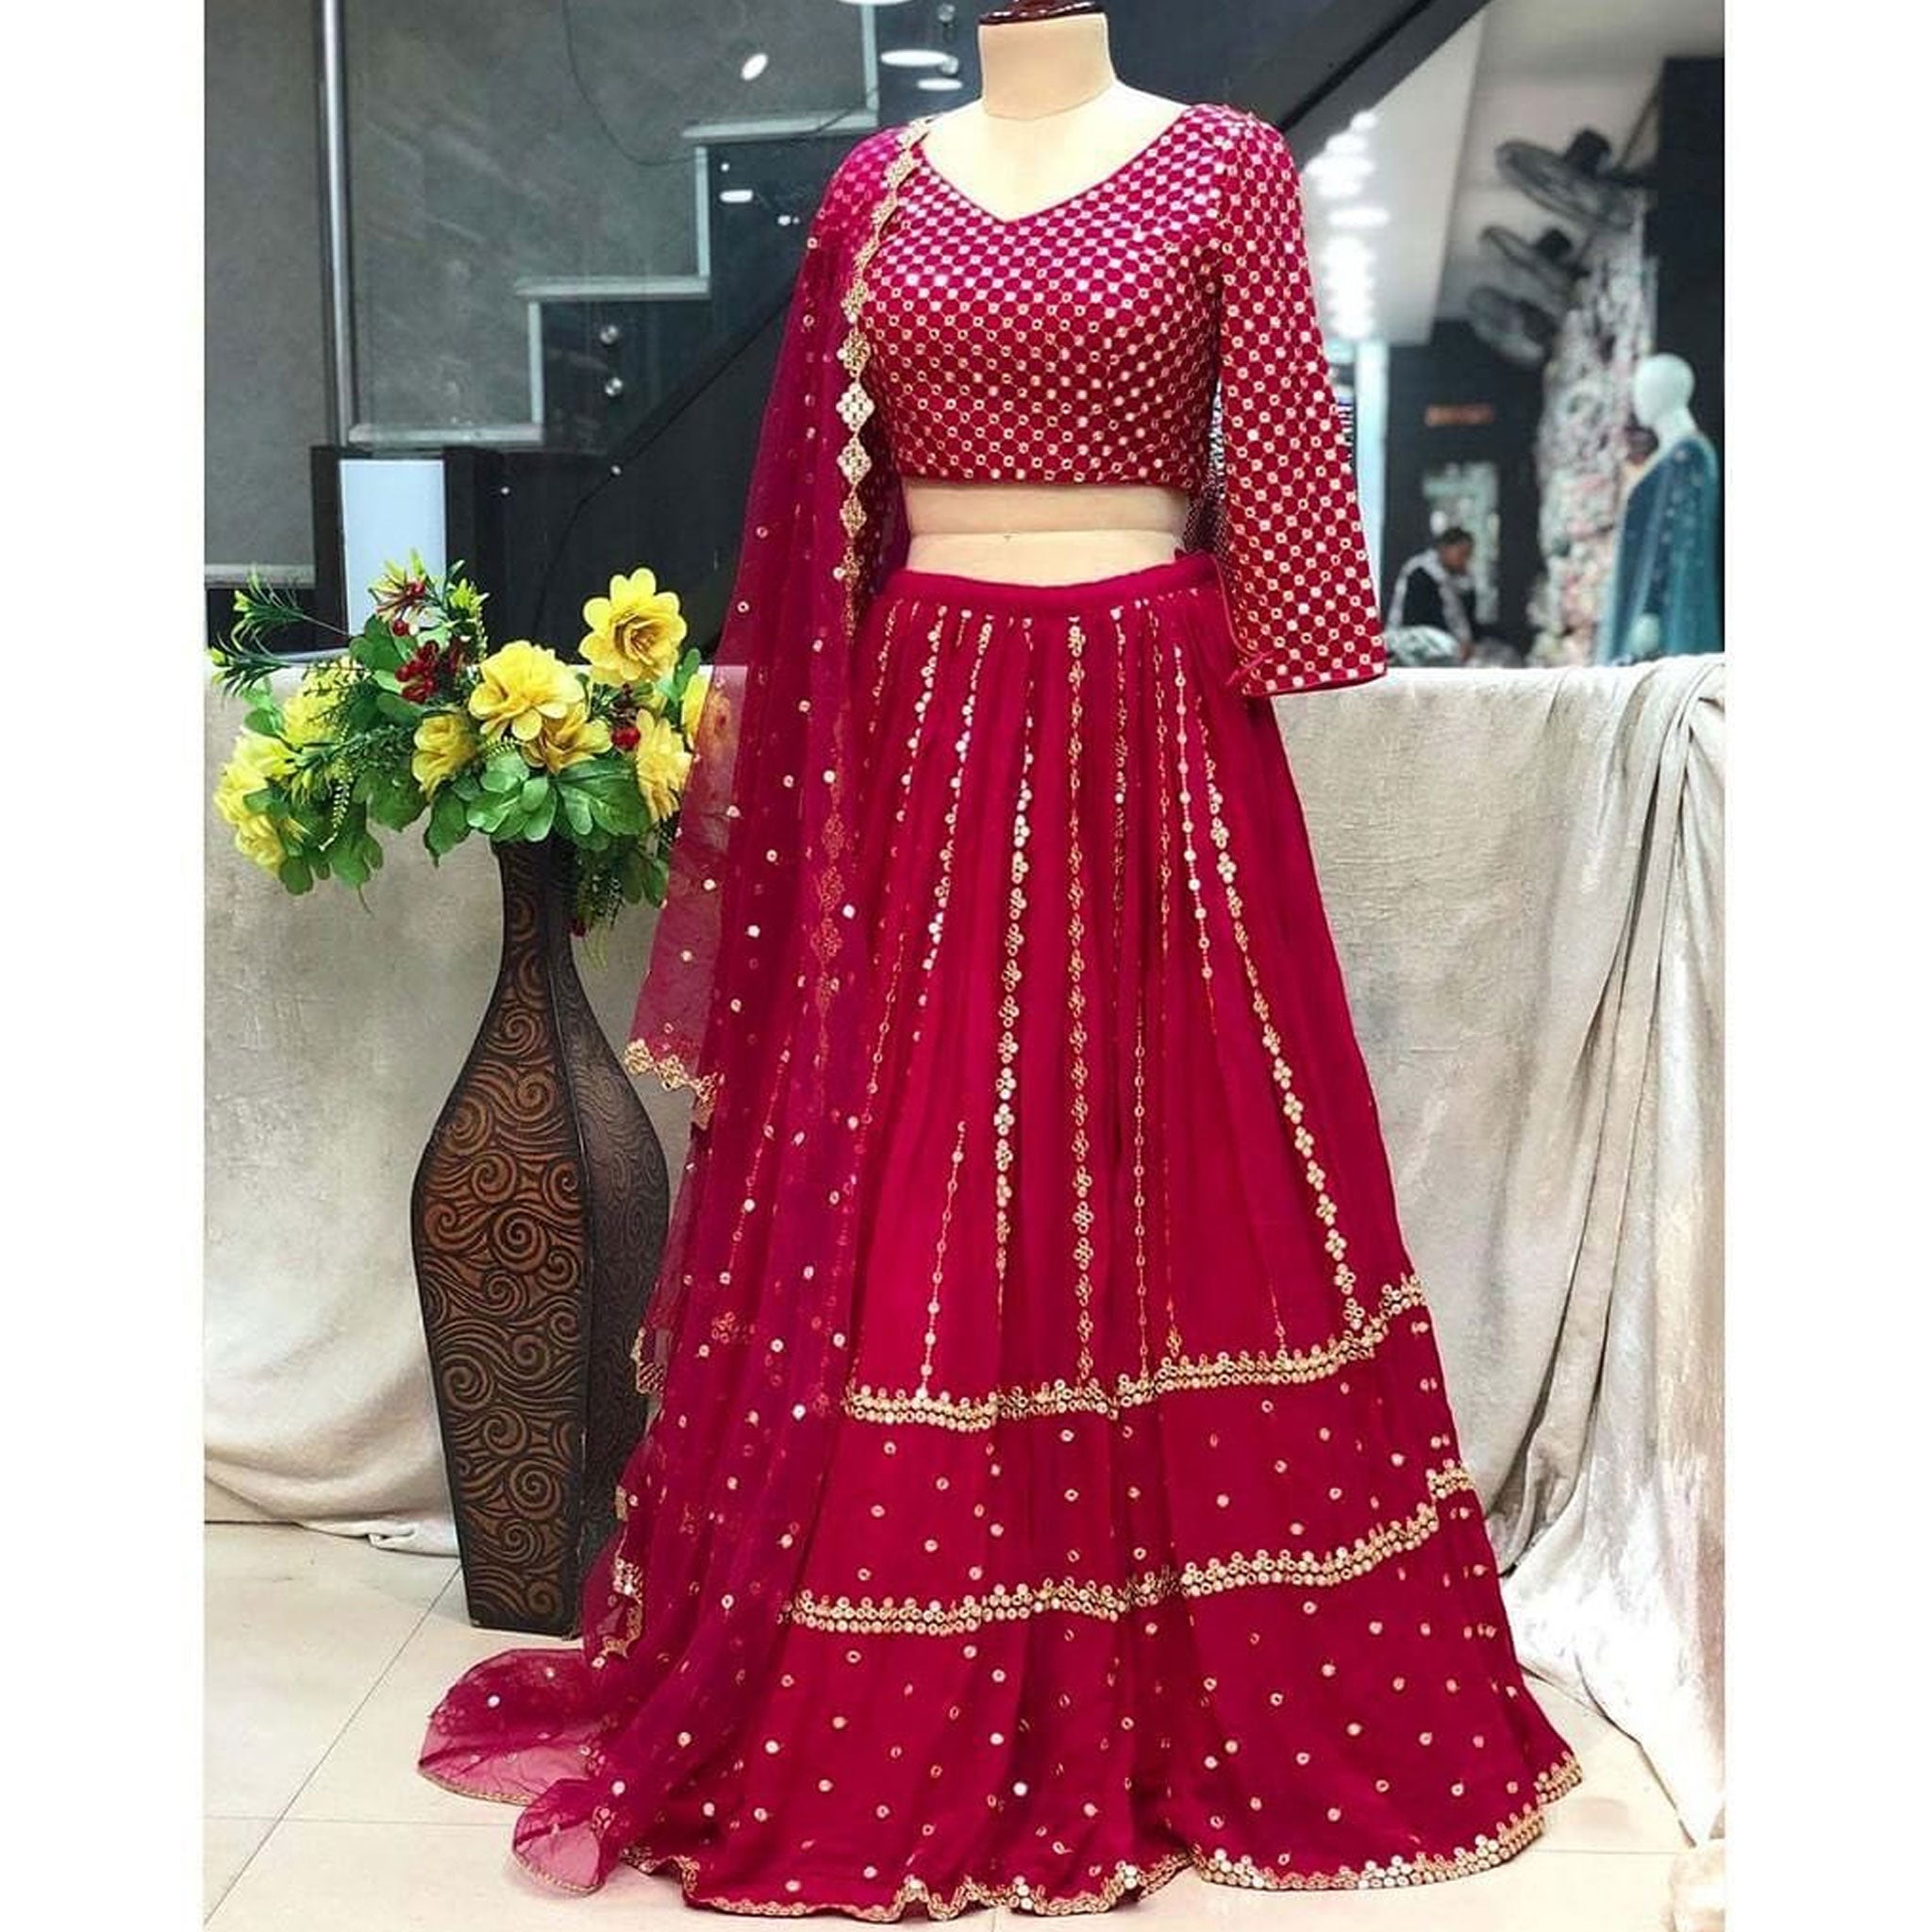 Manyavar Mohey Bridal Collection 2020 To Leave An Everlasting Impression on  Your Big Day!